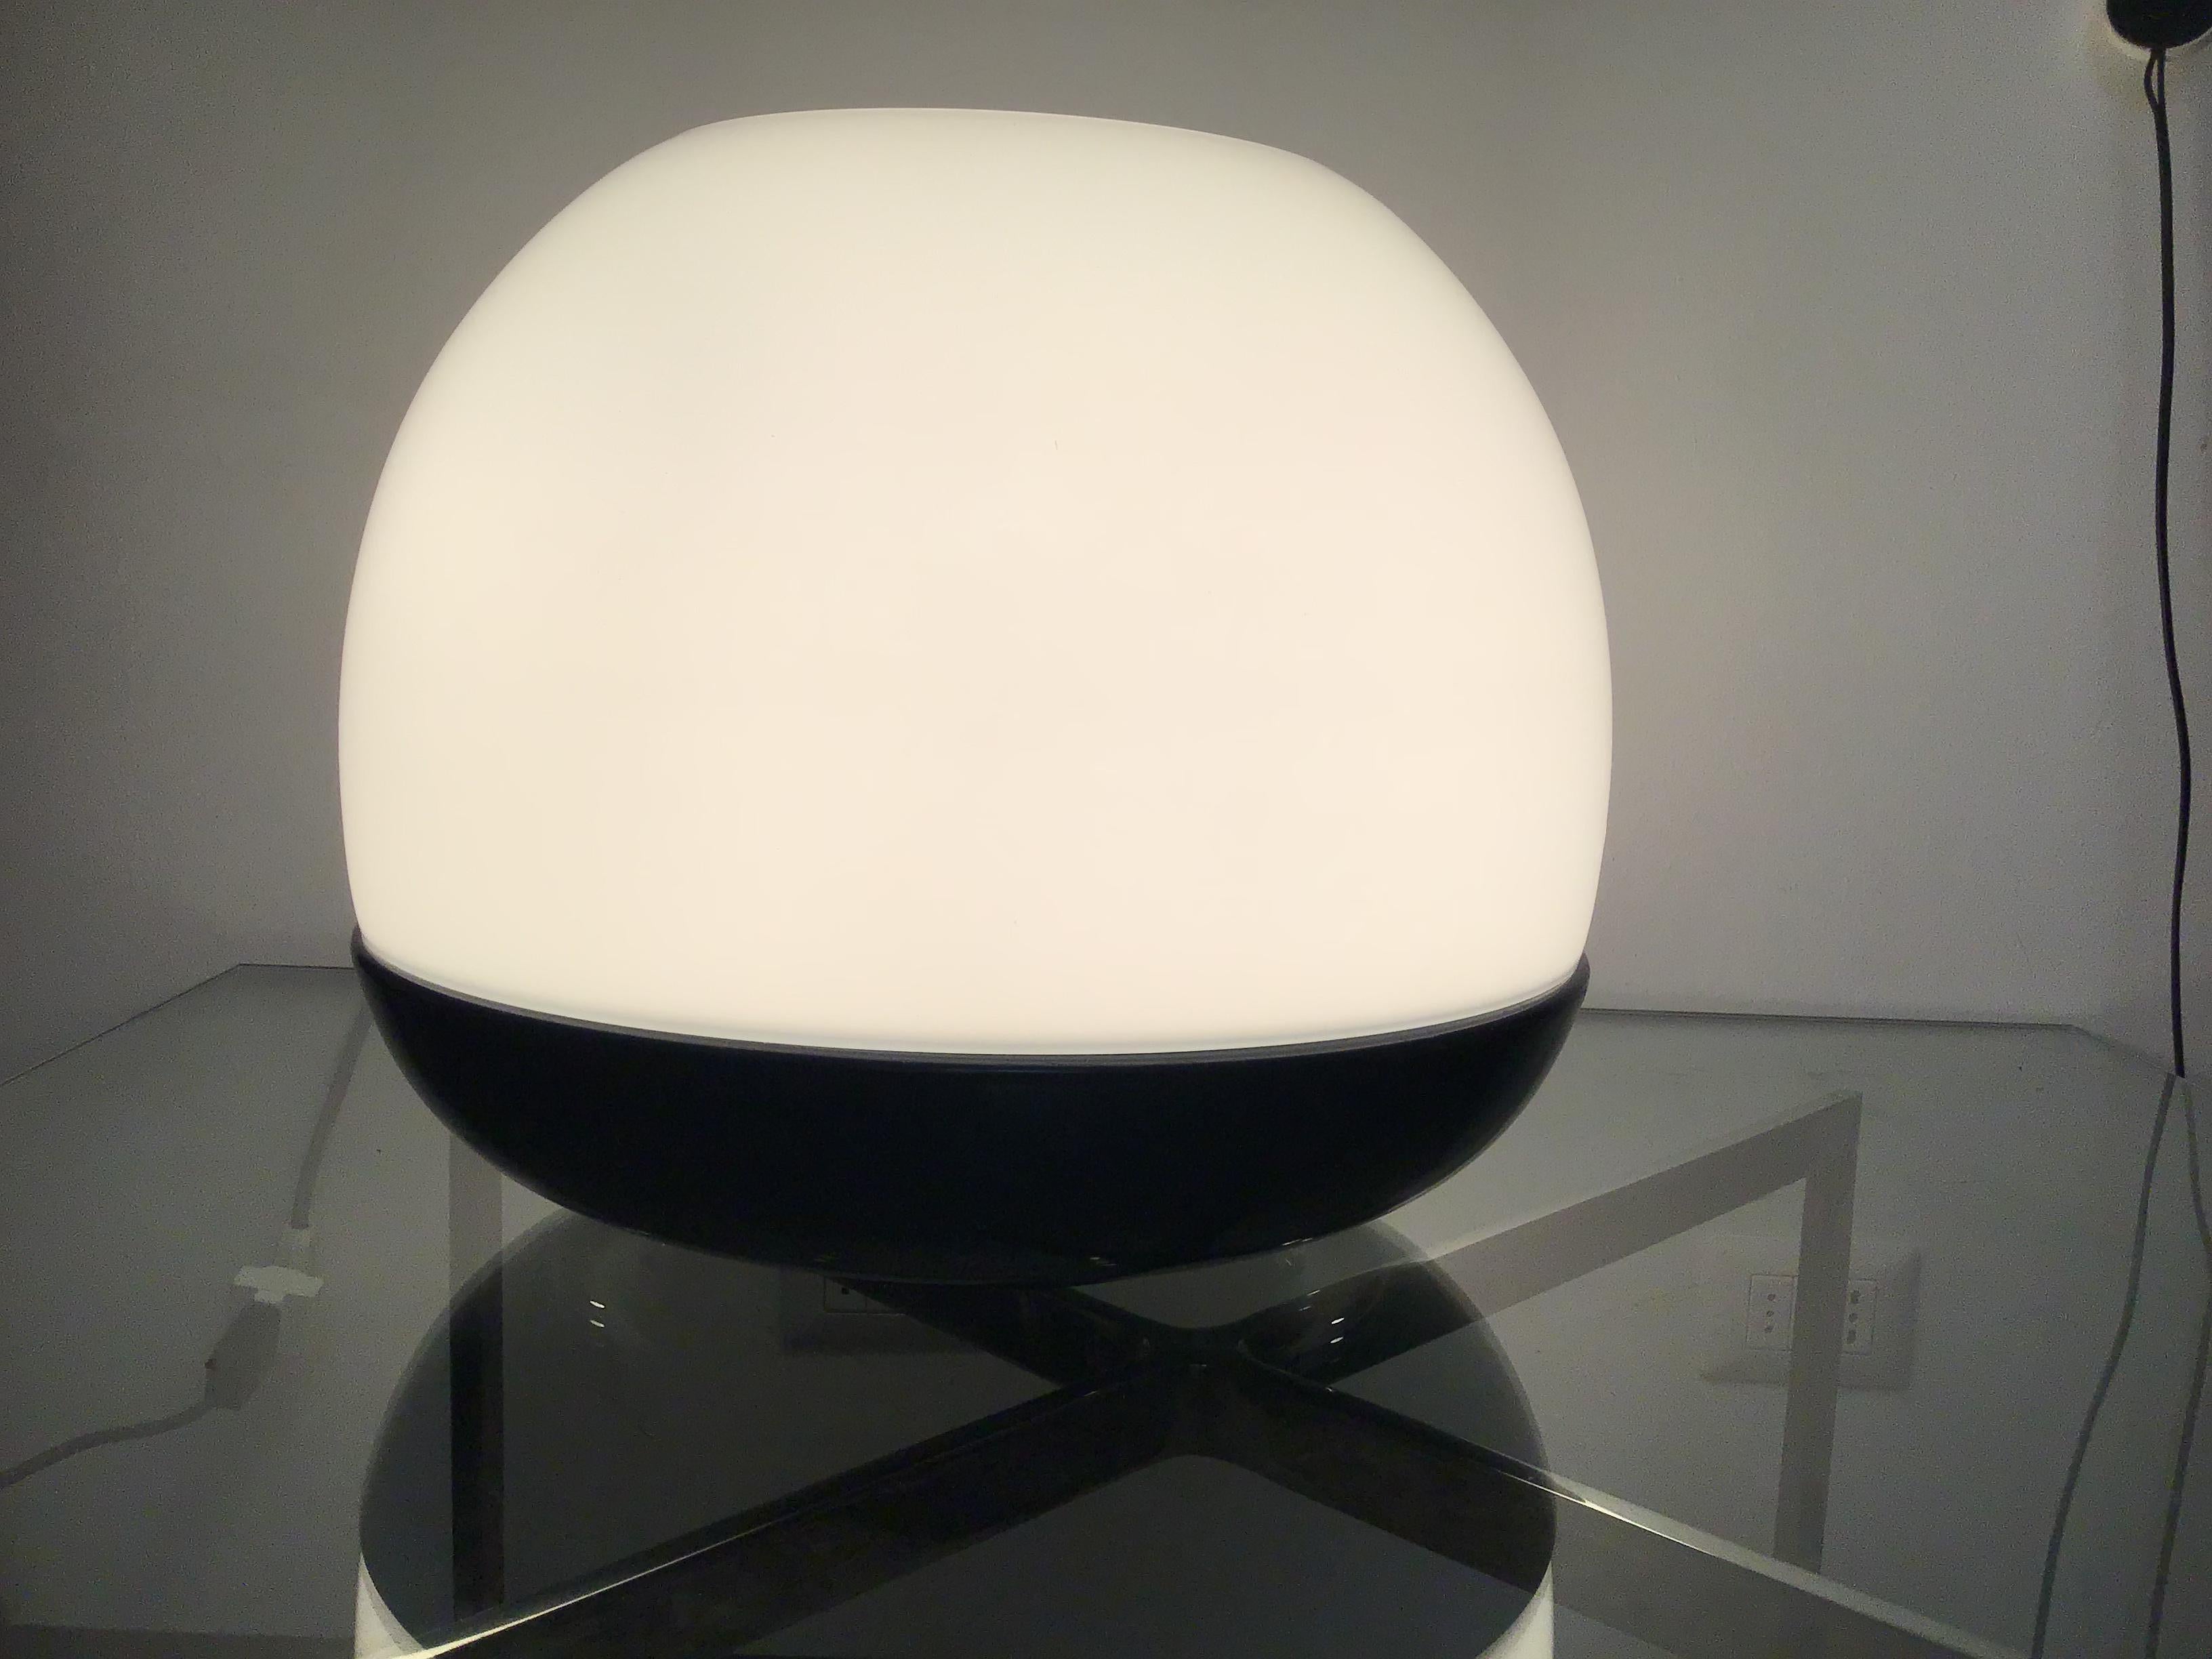 Artemide “Platea” table lamp with blue aluminum base and blown glass diffuser, 1965.